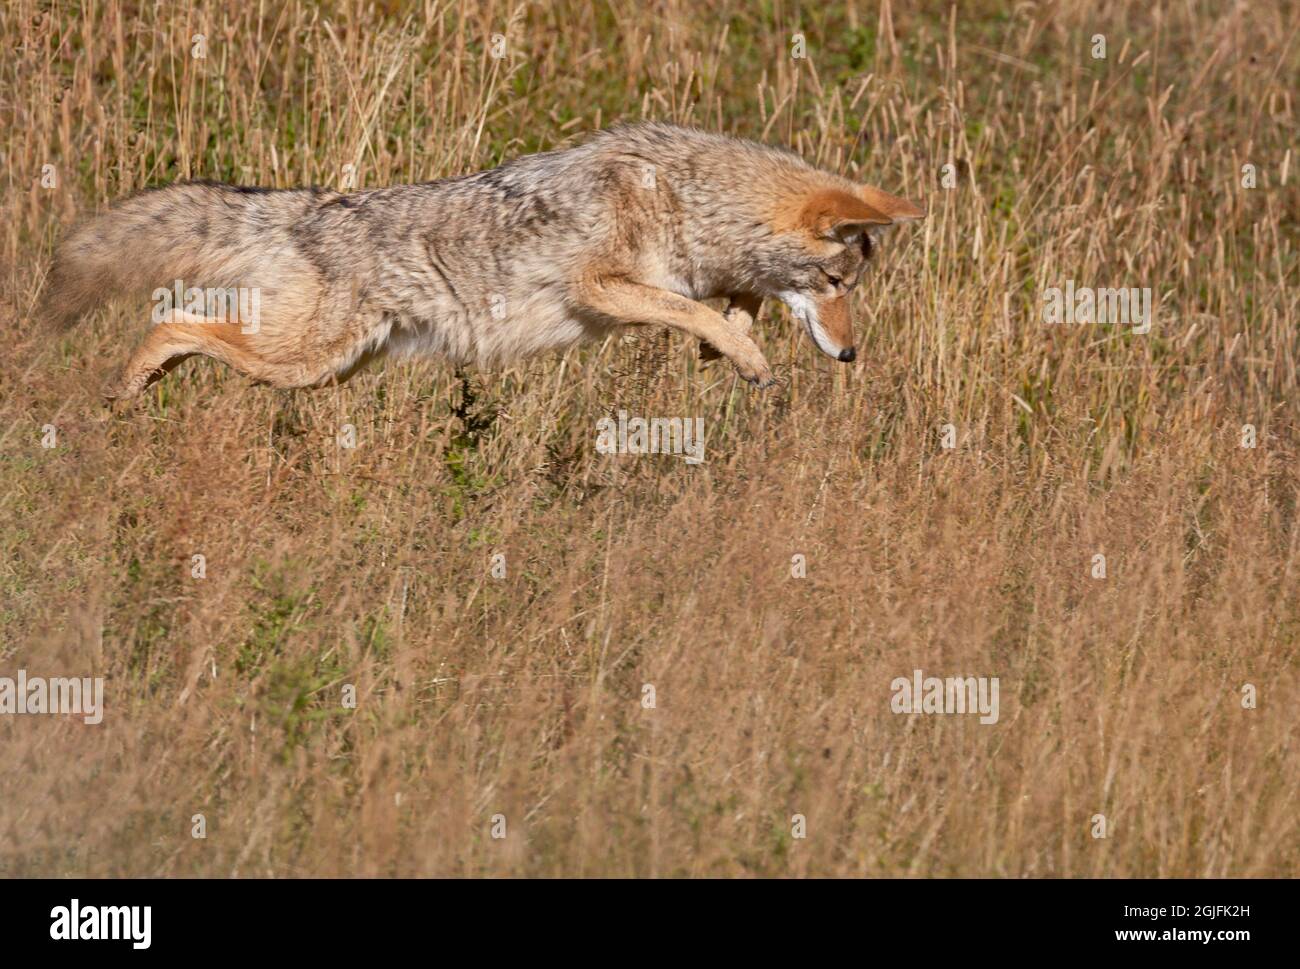 Yellowstone National Park. A coyote makes a leap to hopefully catch a rodent. Stock Photo